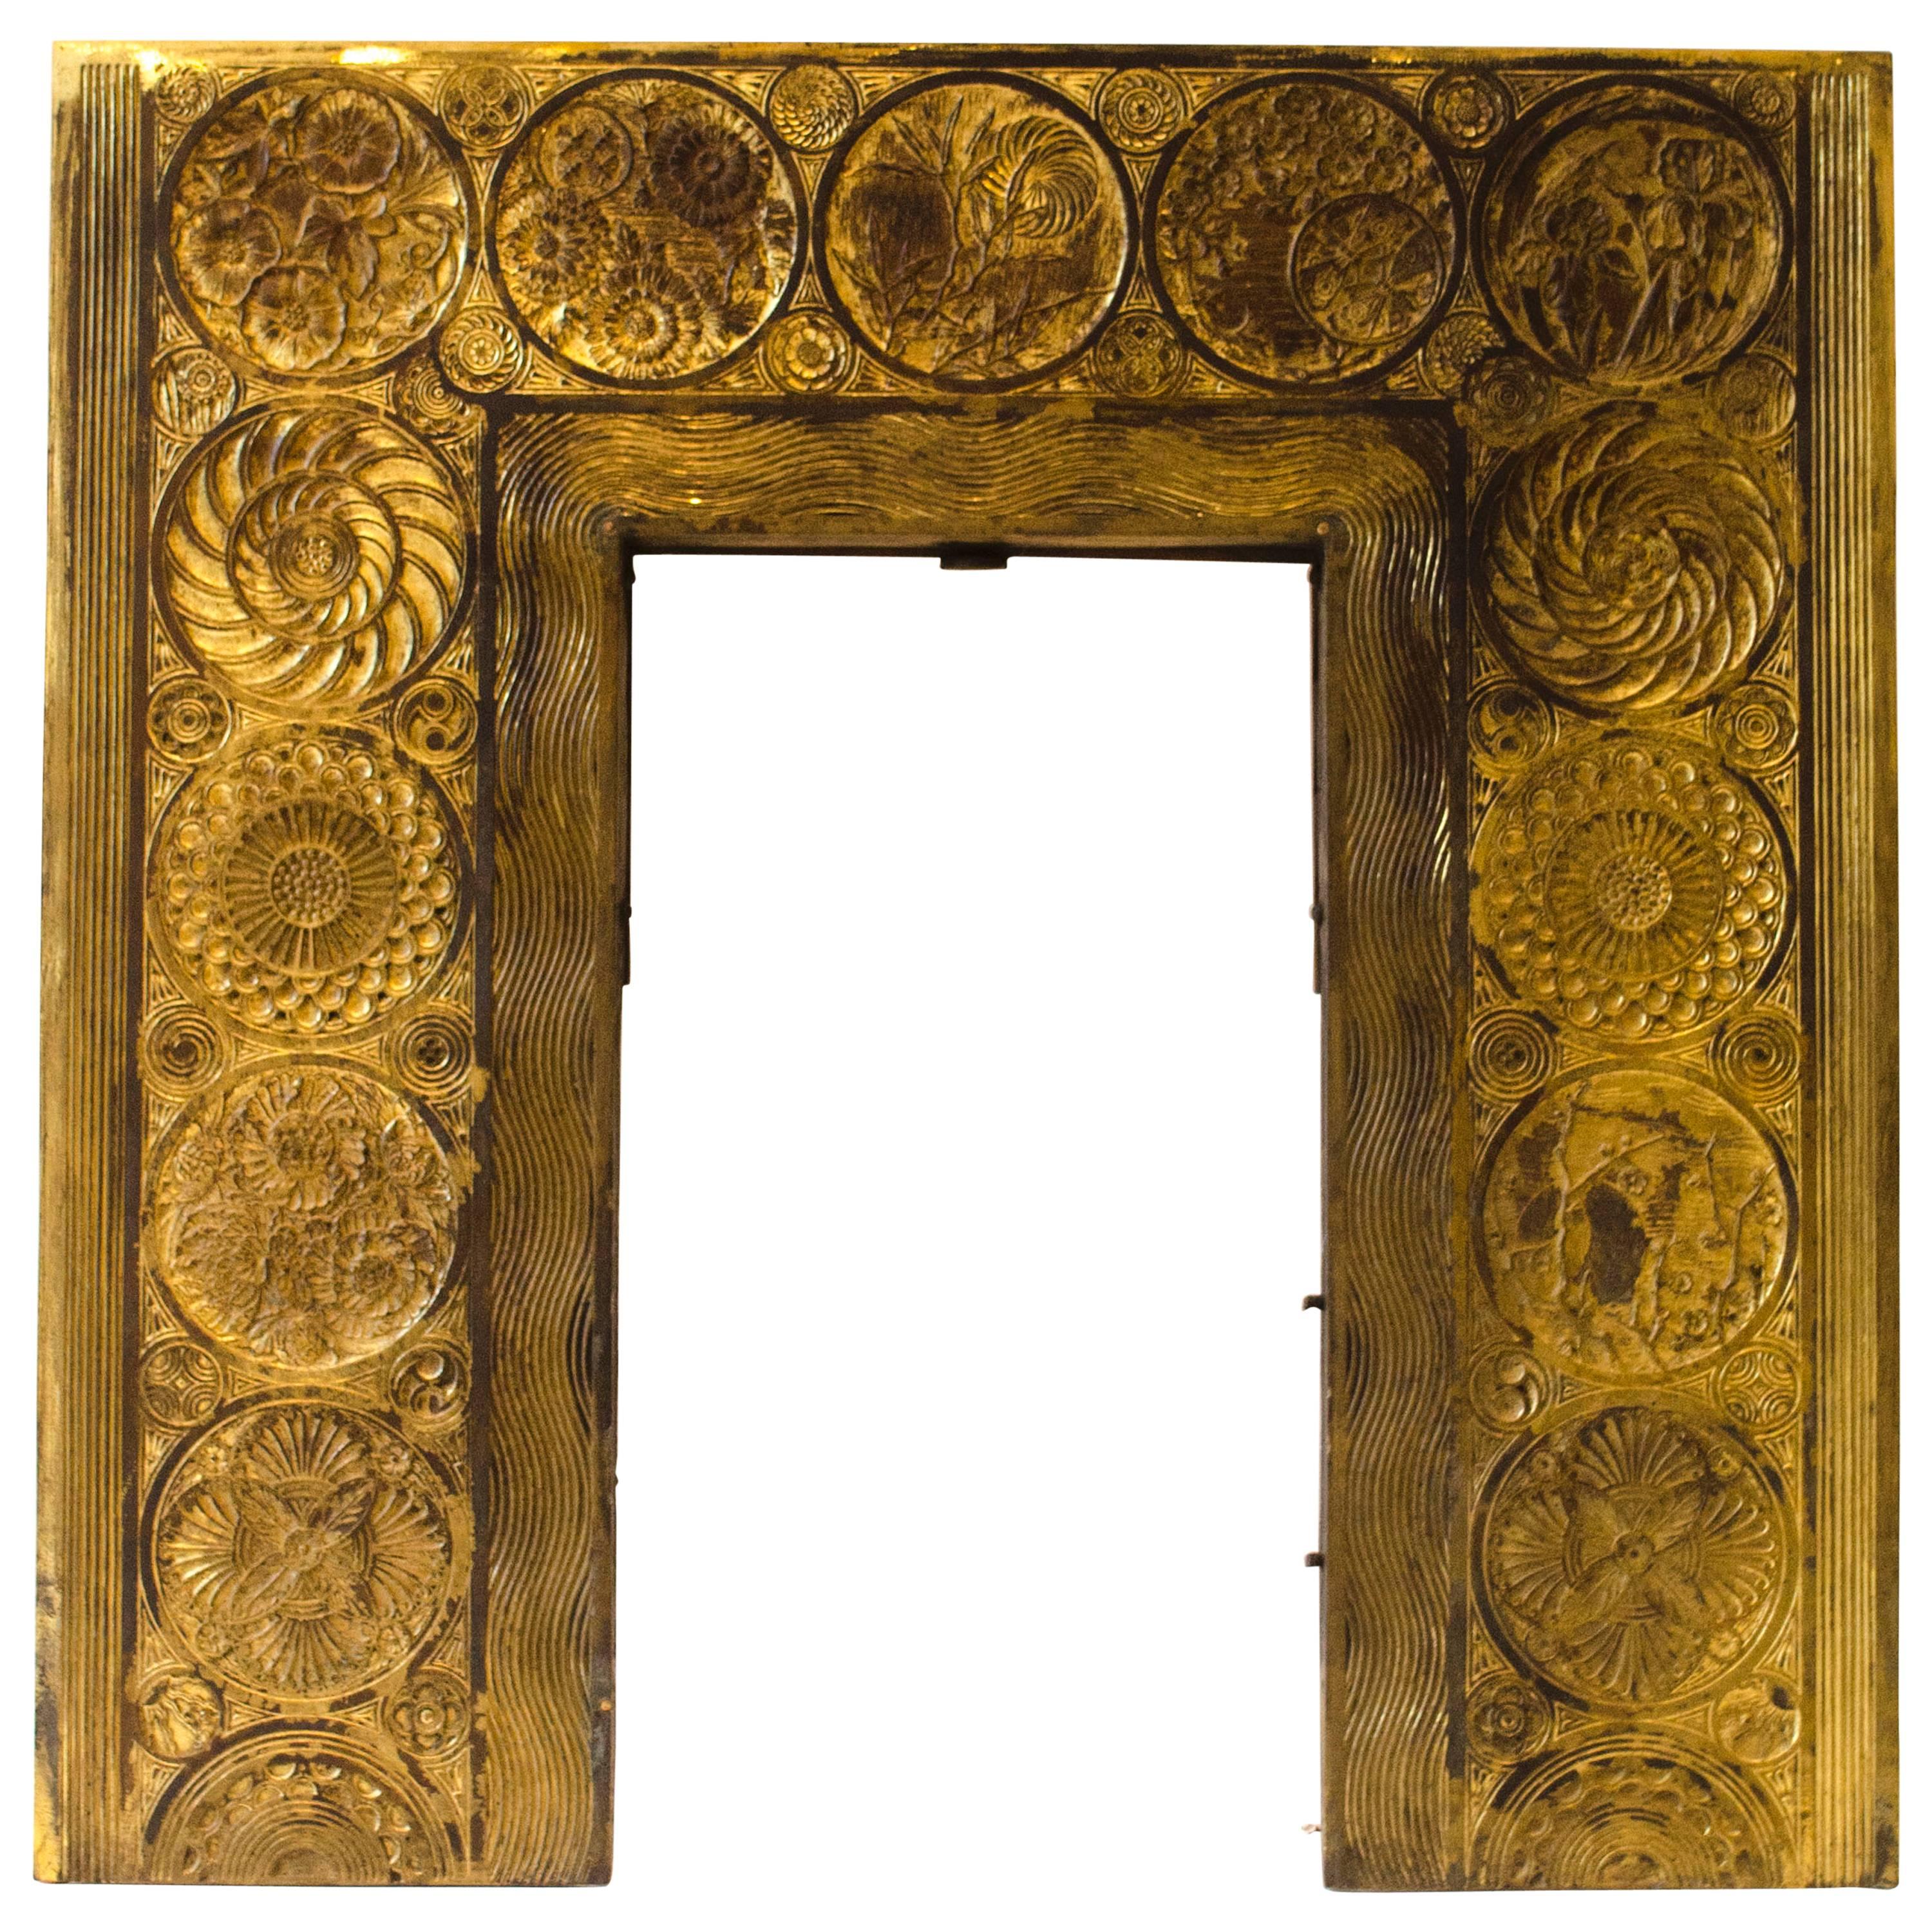 A Rare & Important Anglo-Japanese Cast Brass Fireplace Insert by Thomas Jeckyll